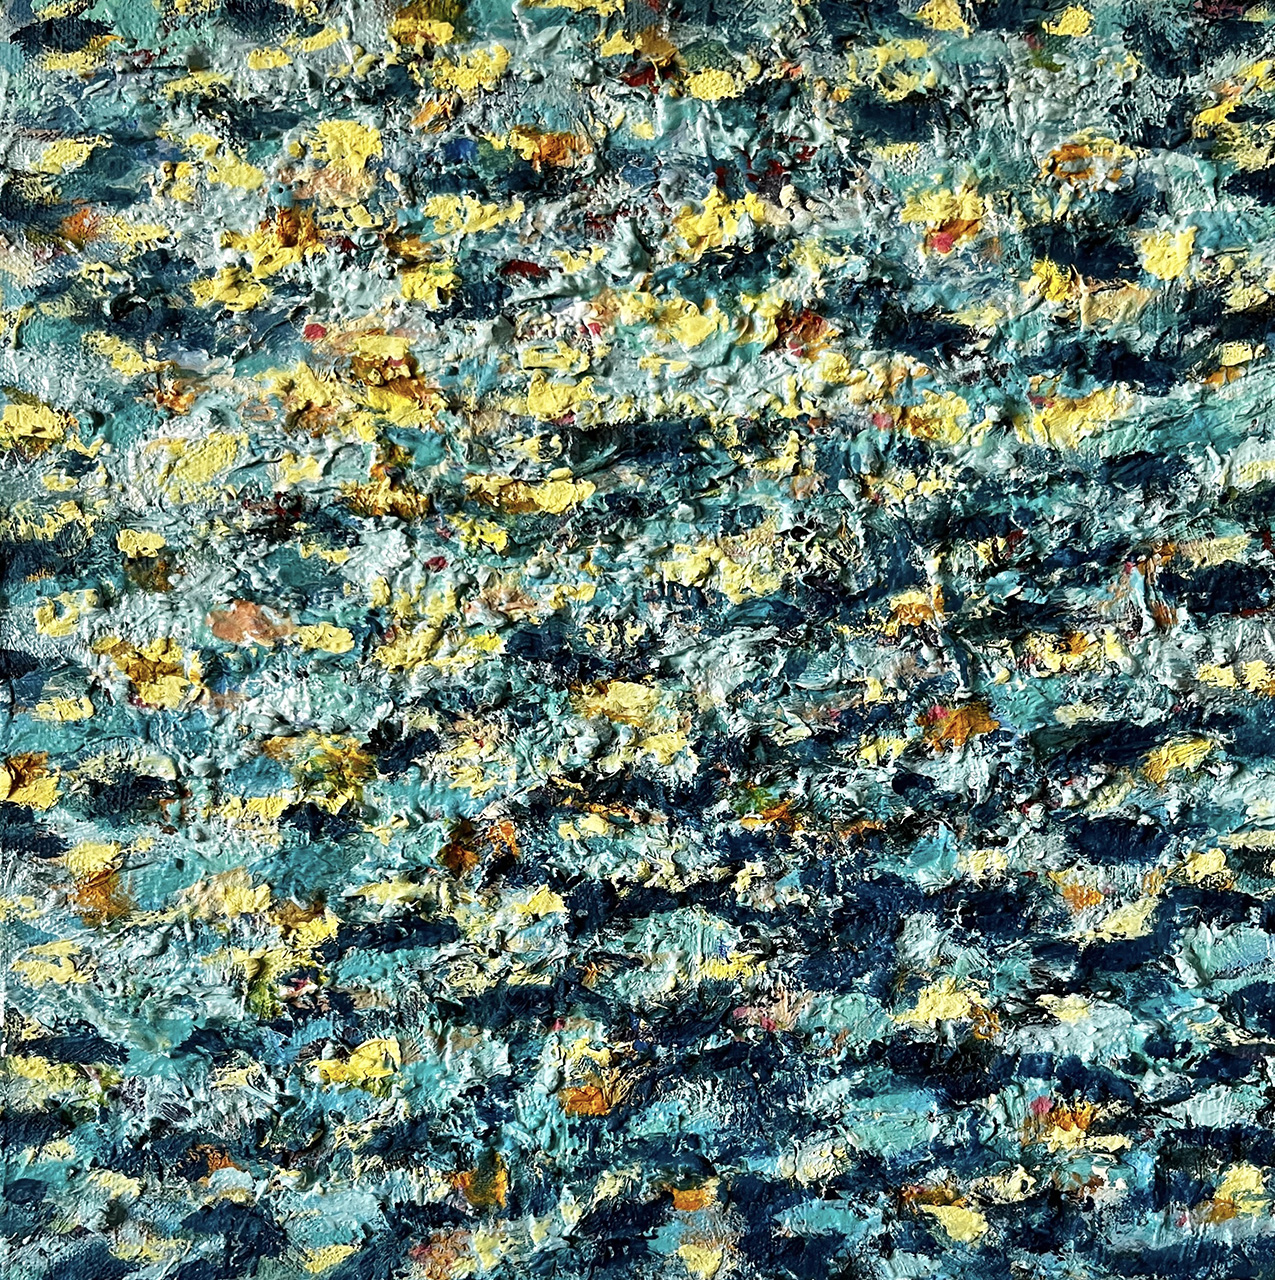 heavily textured turquoise and yellow oil painting in a mottled pattern resembling light on water